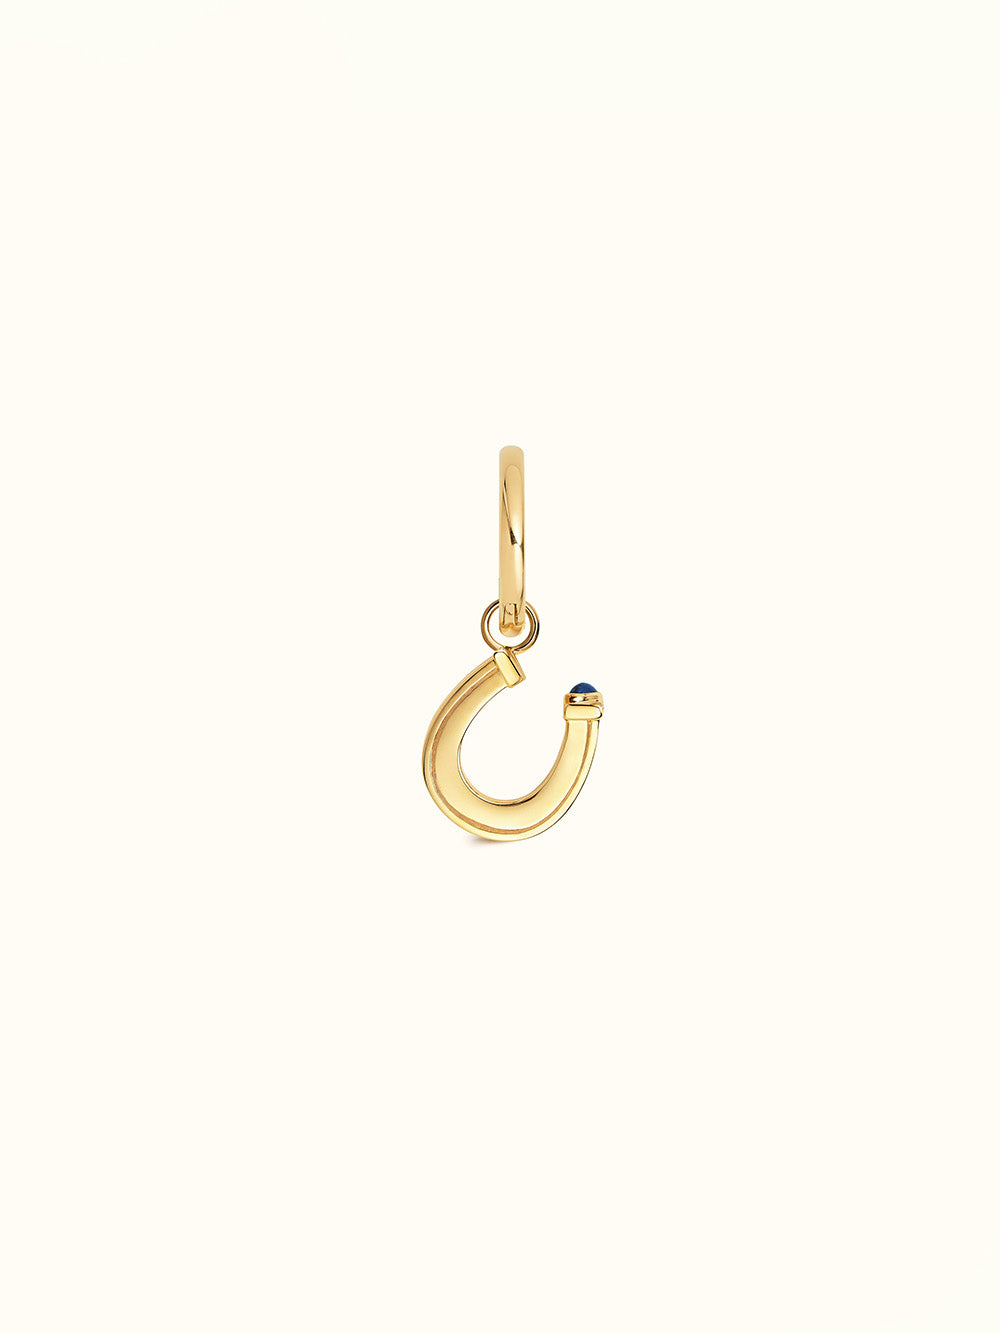 BABY CHARM HORSESHOE GOLD AND BLUE SAPPHIRE EARRING